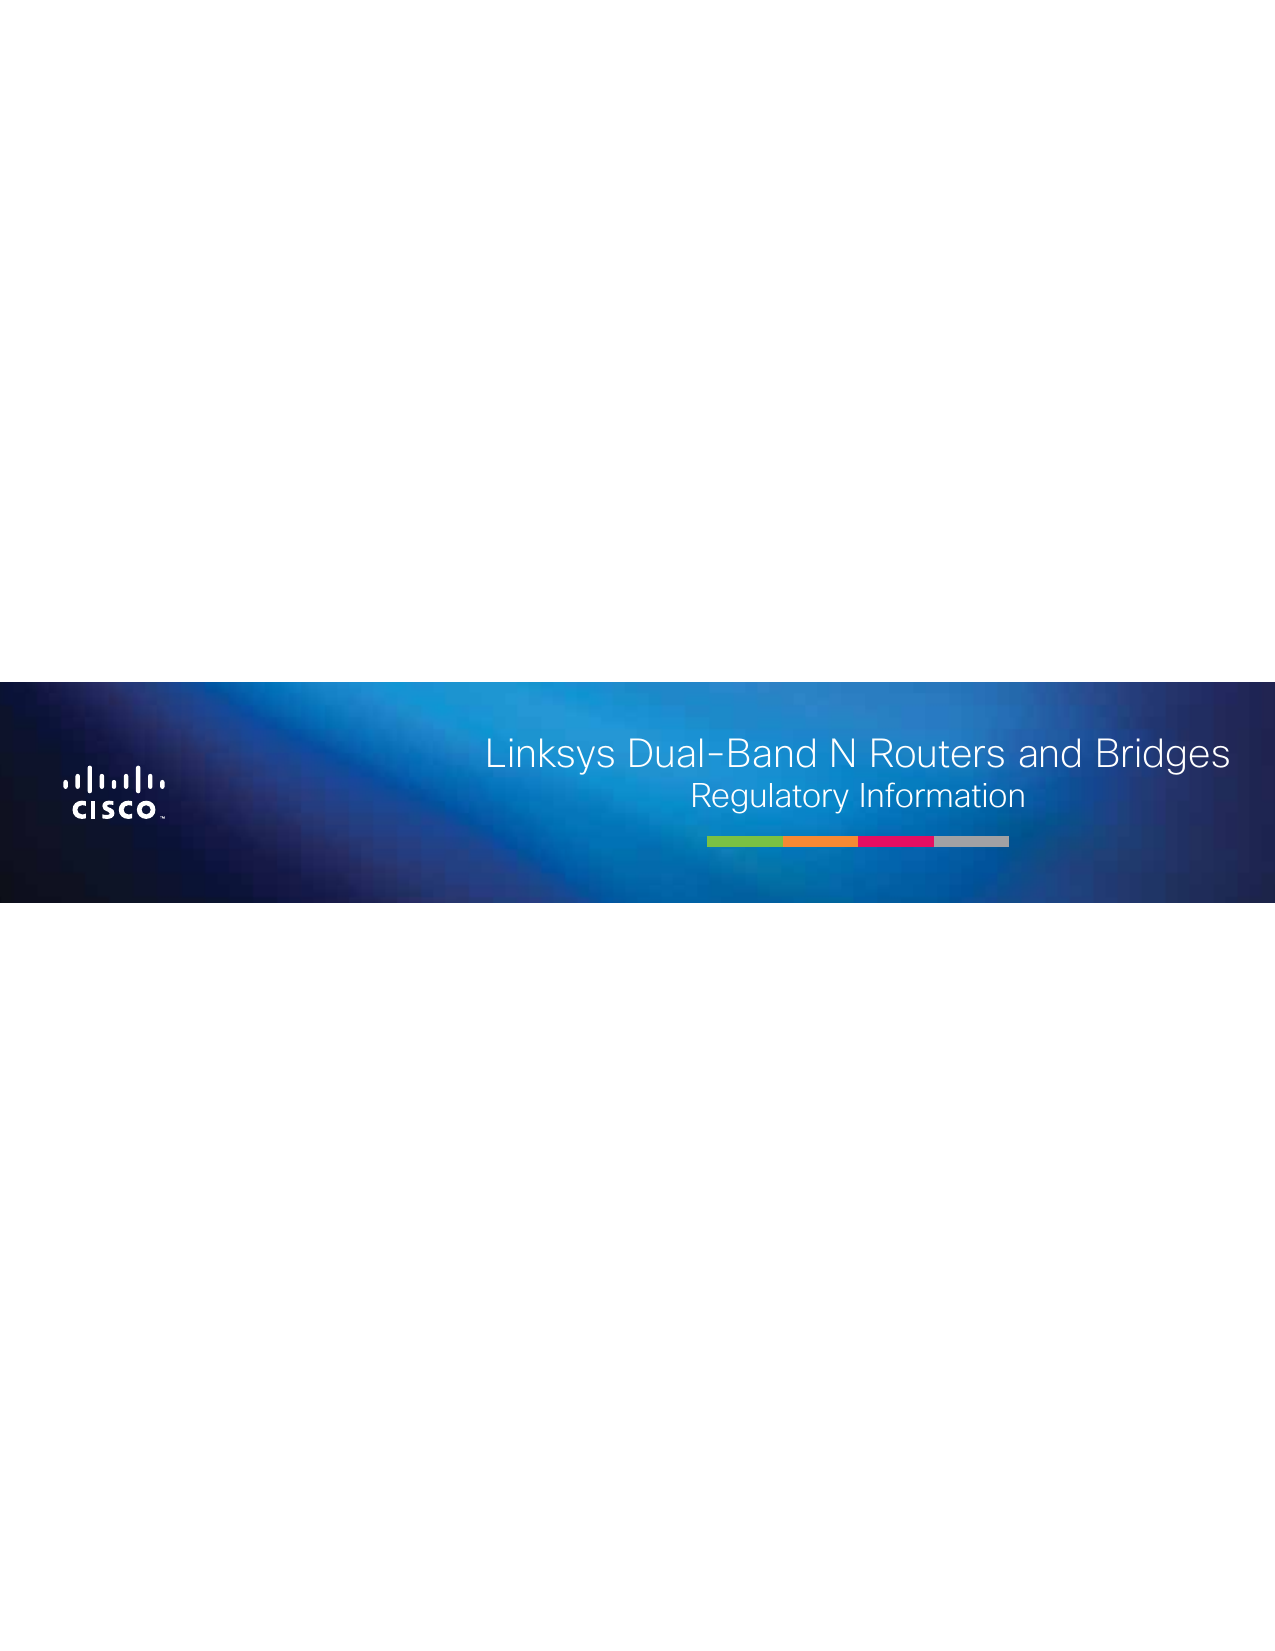 Linksys Dual-Band N Routers and Bridges Regulatory Information